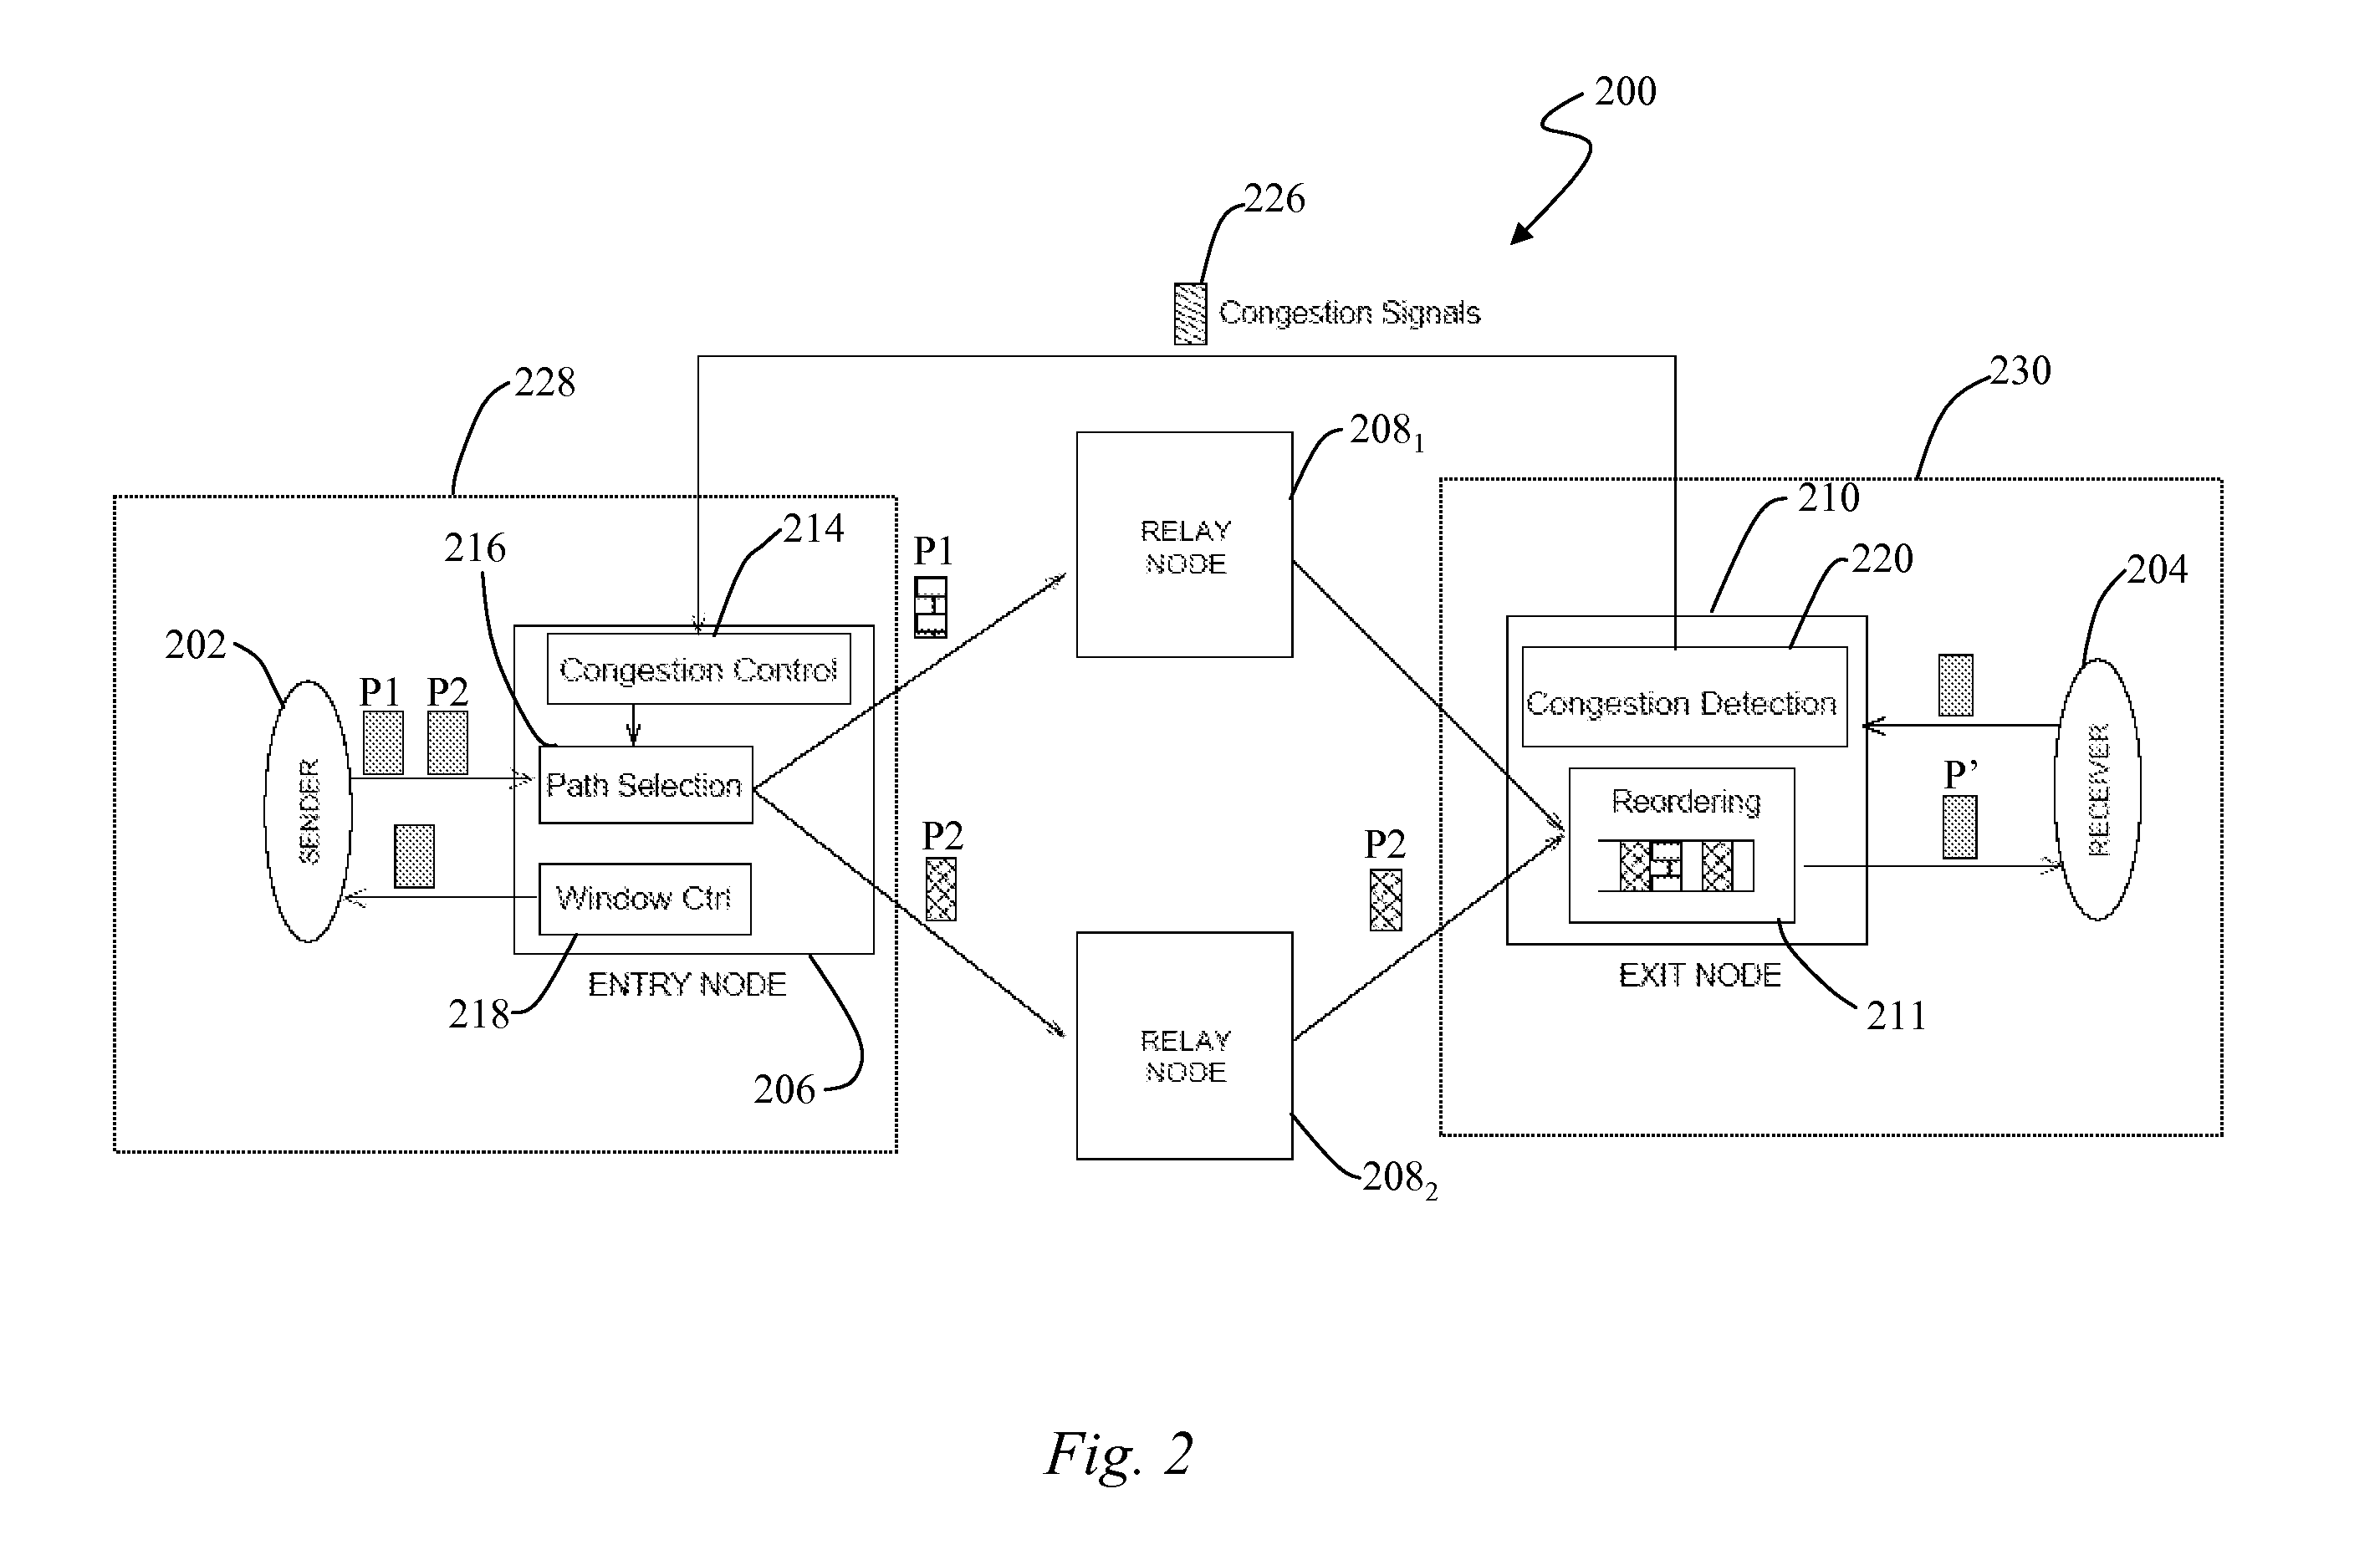 Multipath Routing Architecture for Large Data Transfers